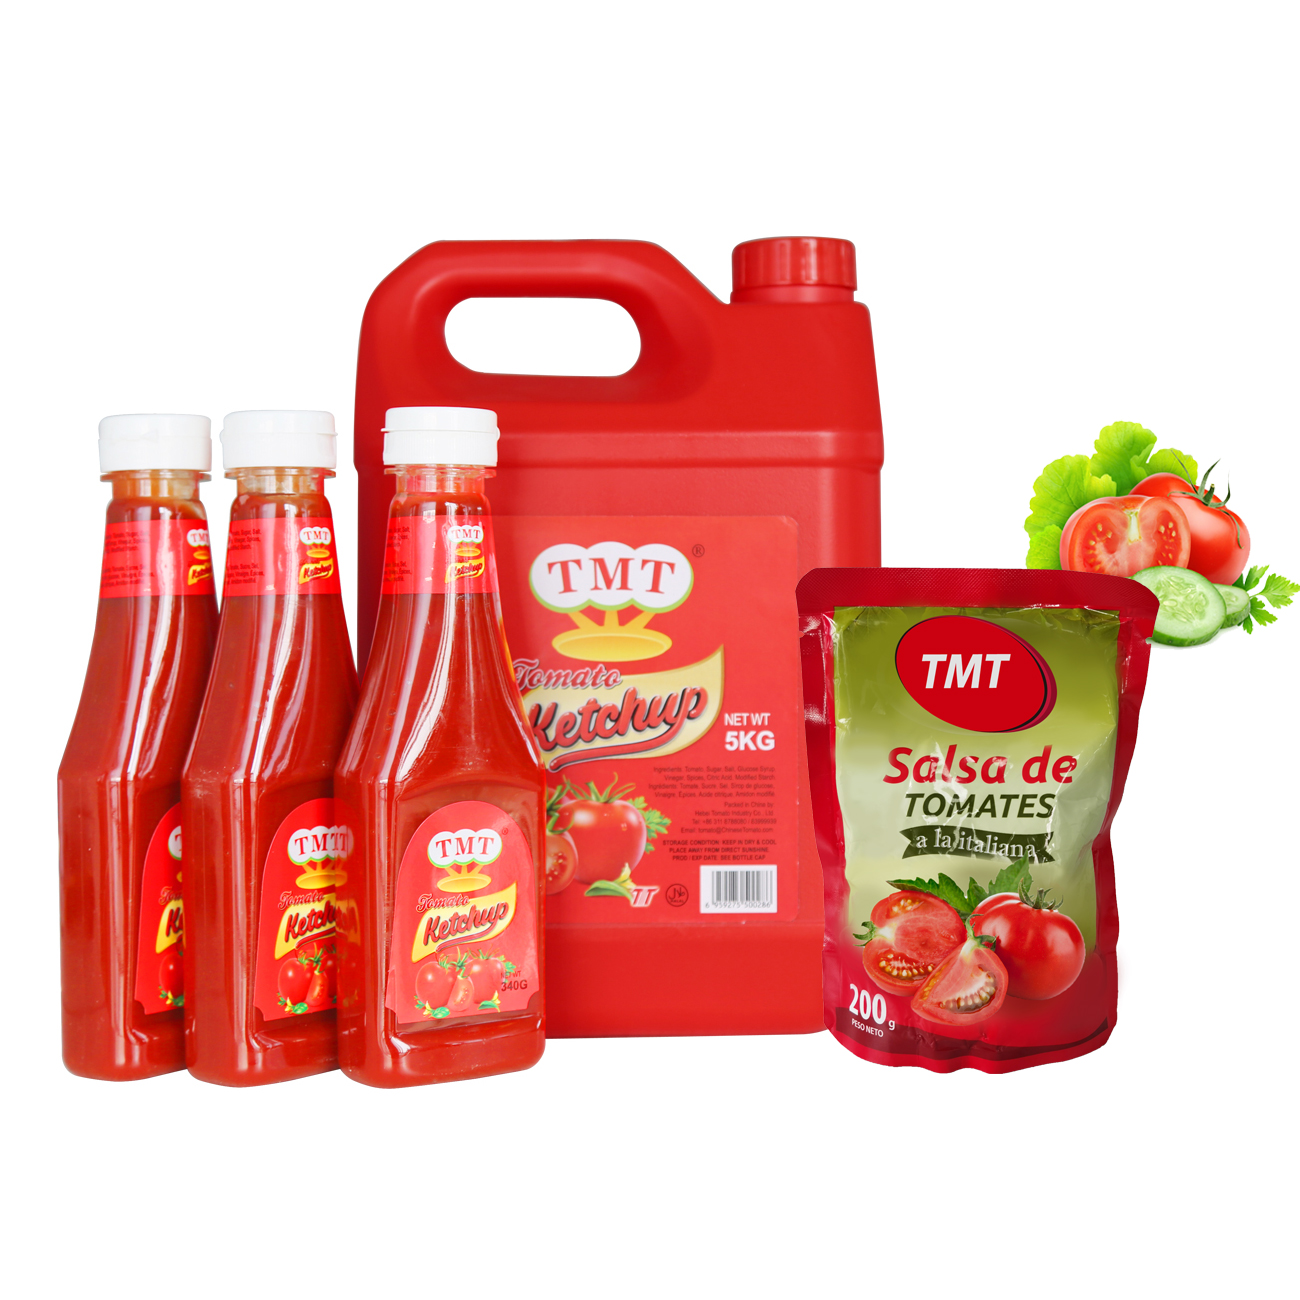 Delicious 340g Tomato Ketchup From Factory with Plastic Bottle